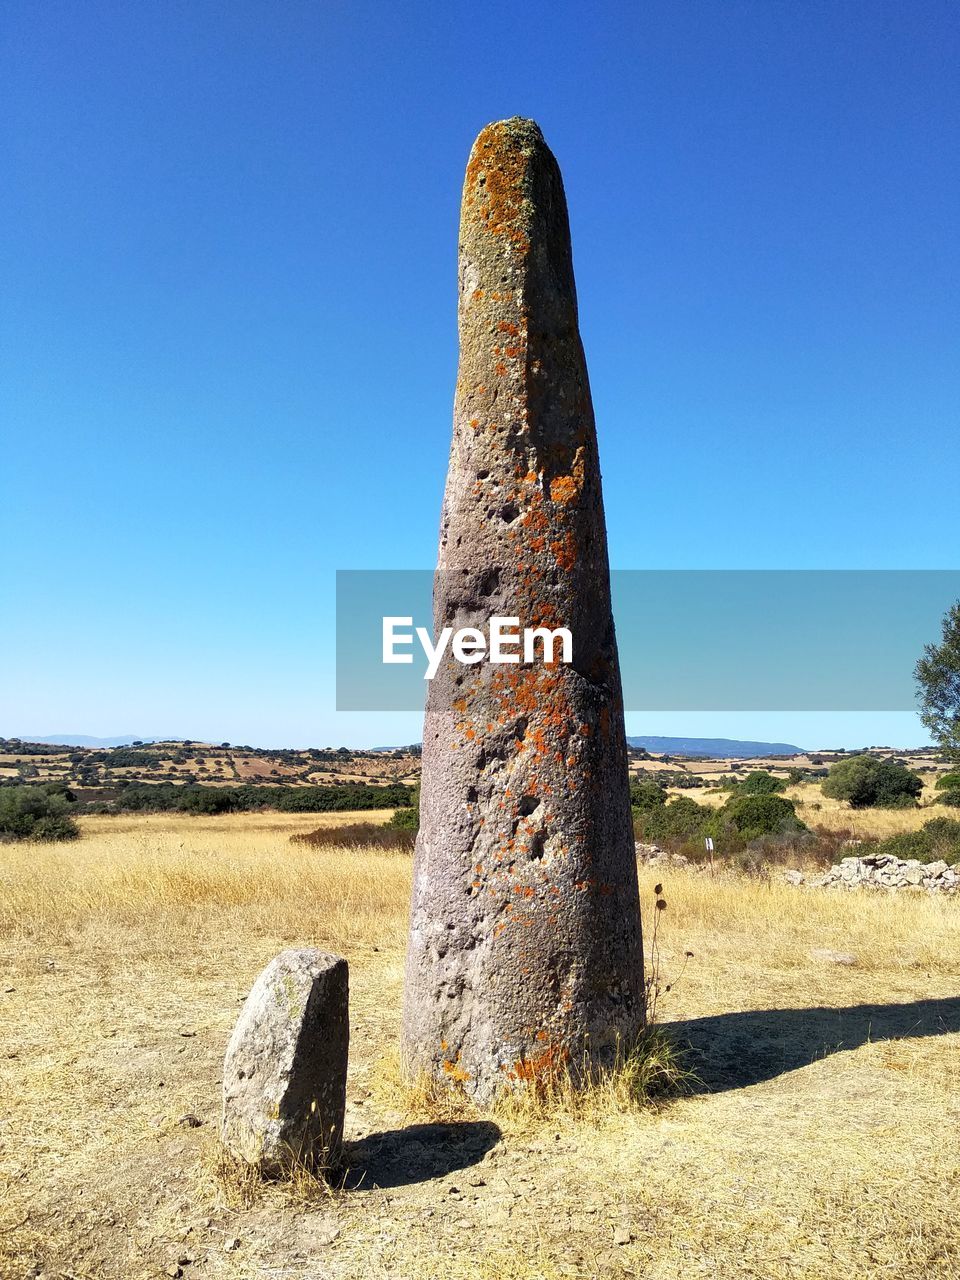 rock, sky, monolith, monument, clear sky, landscape, nature, land, sunlight, blue, history, ancient history, sunny, no people, the past, scenics - nature, ruins, environment, desert, travel destinations, day, megalith, landmark, geology, architecture, ancient, tranquil scene, tranquility, plant, travel, outdoors, sculpture, non-urban scene, old, old ruin, sea, natural environment, beauty in nature, temple, tree, semi-arid, sand